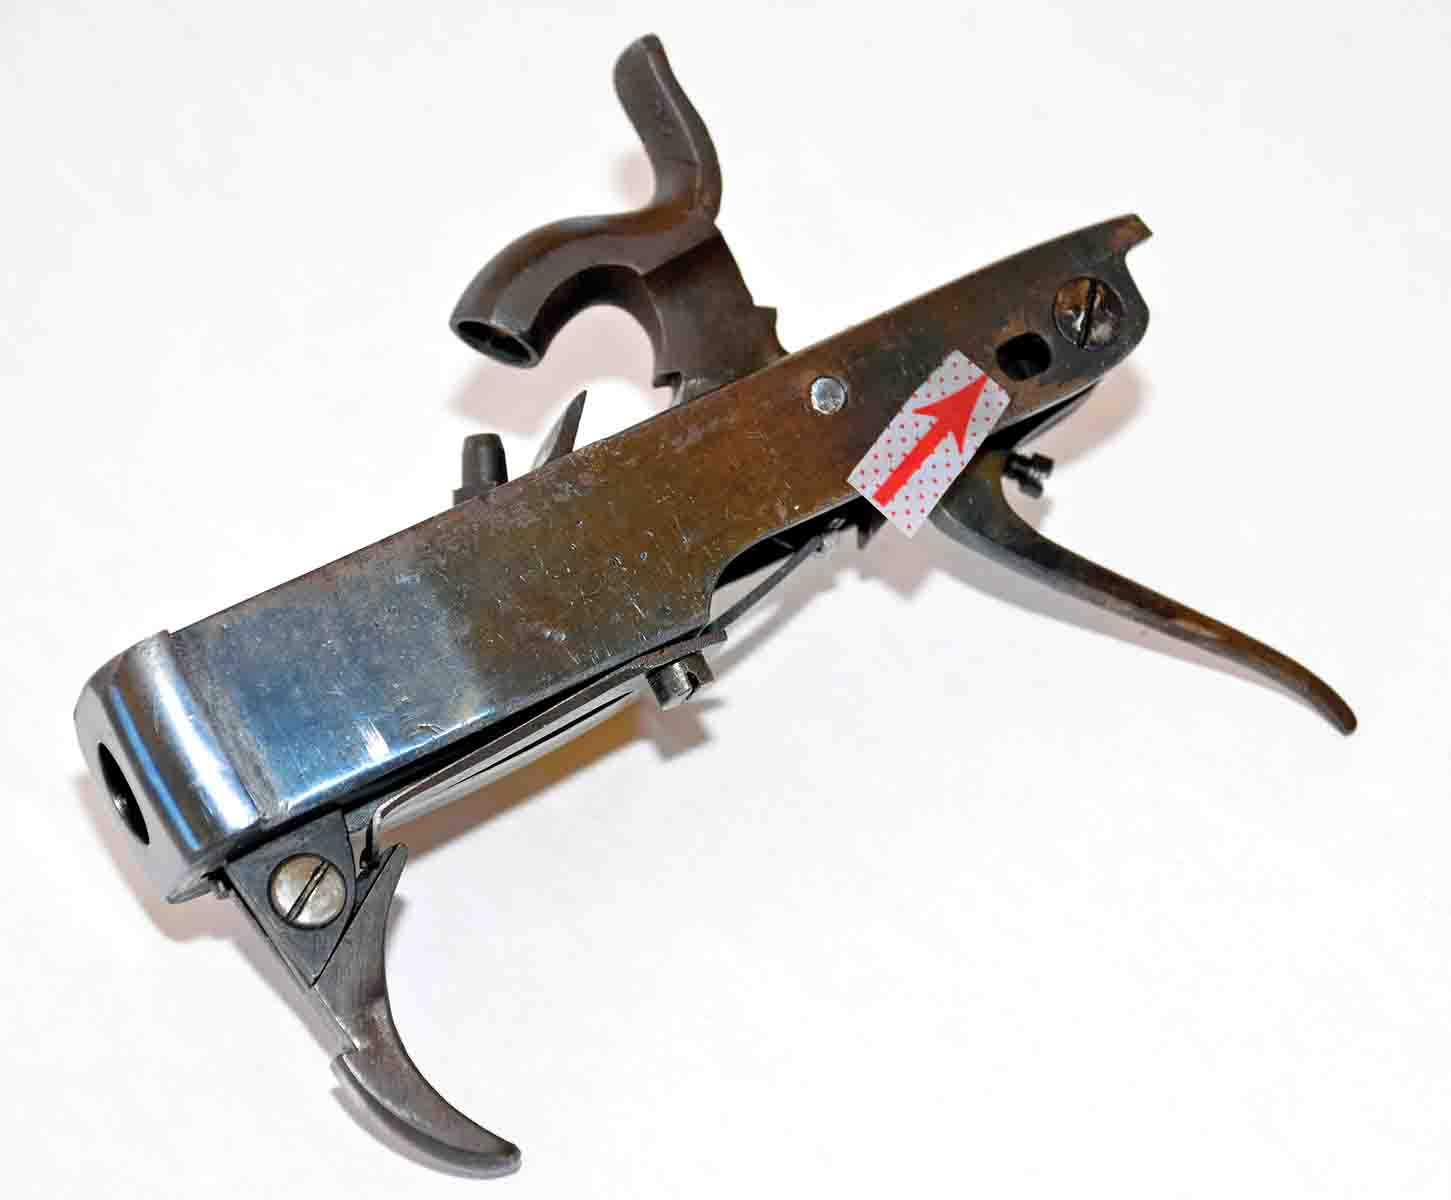 This shows the breechblock removed from the receiver. The arrow shows the pivot/tip up hole where a single screw passes through to hold the block into the receiver. Note that the hole is oval so that the block can be adjusted forward if necessary. It also allows for heat expansion from rapid firing.